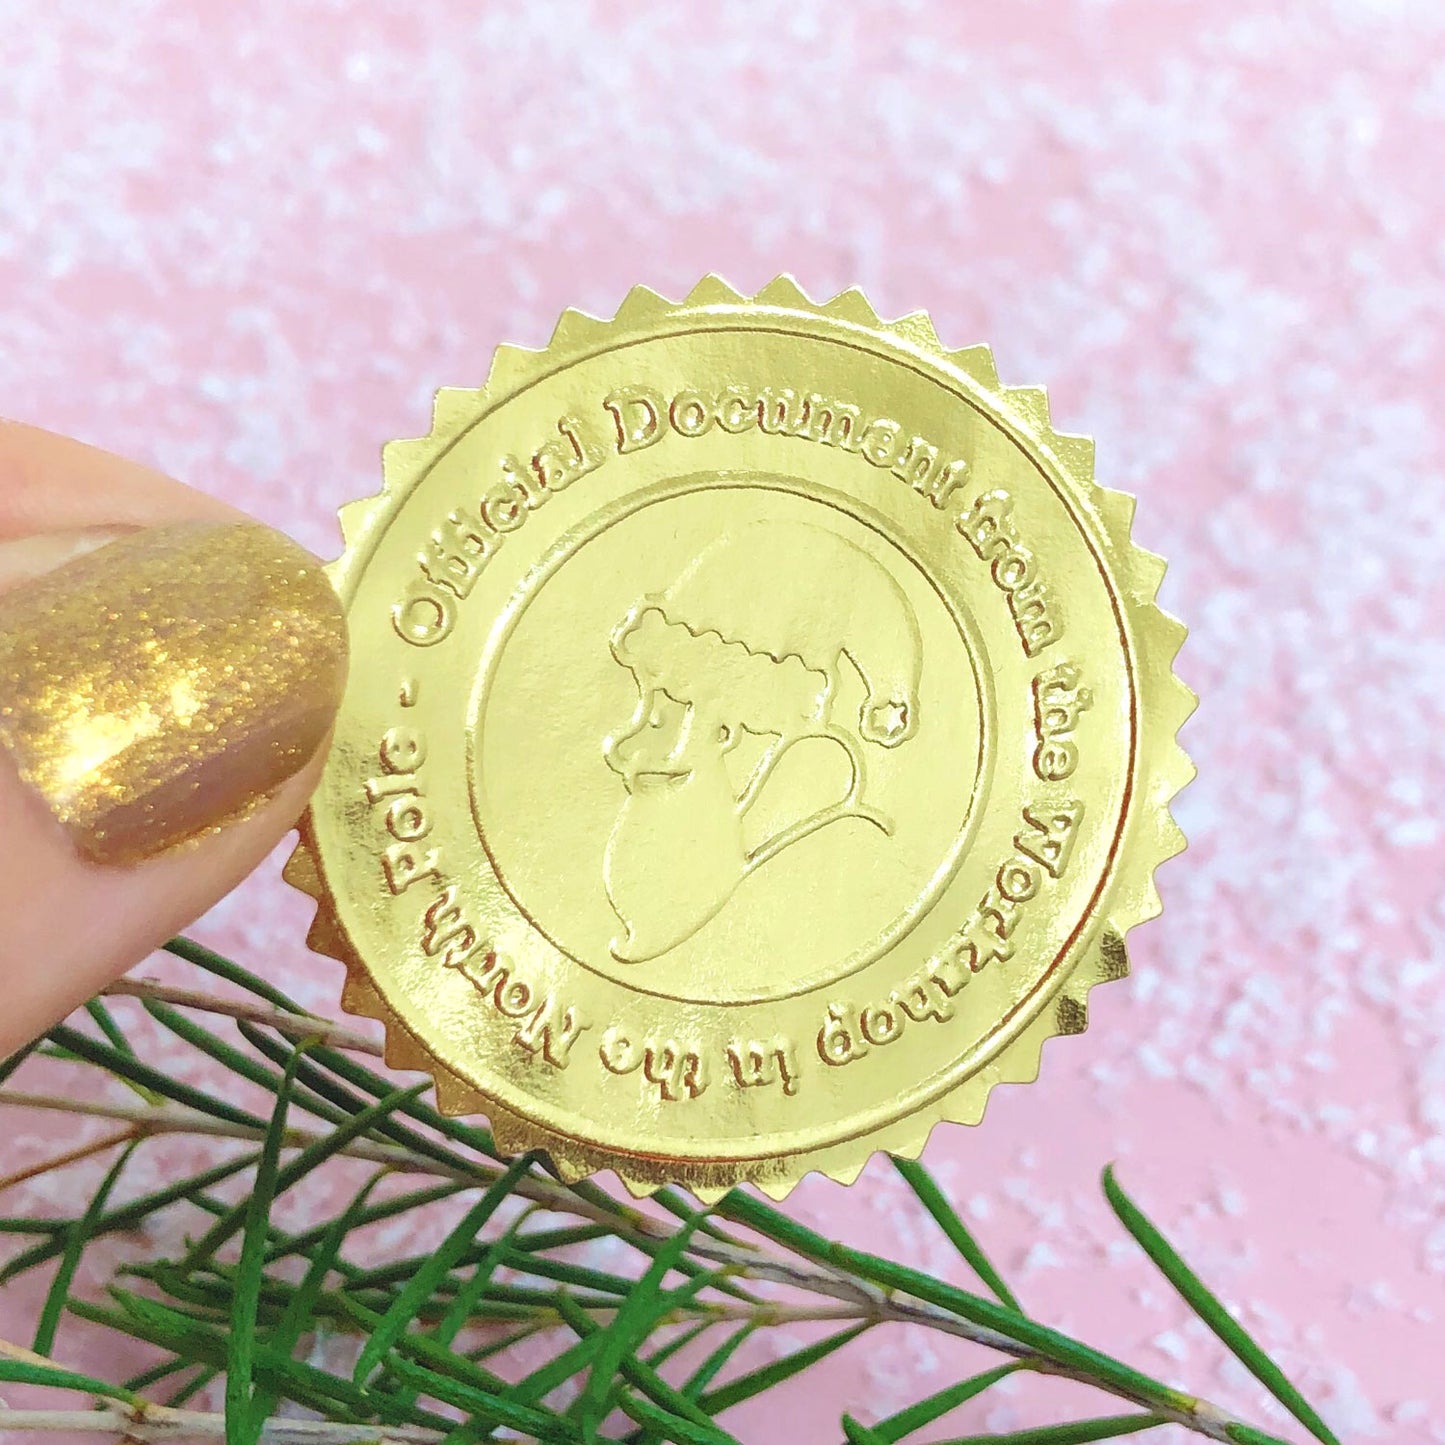 A close up of the shiny gold seal featuring the face of the Father Christmas character. Around the edge it reads: "Official Document from the workshop in the North Pole!" This has been photographed held over a pink background with foliage at the bottom.